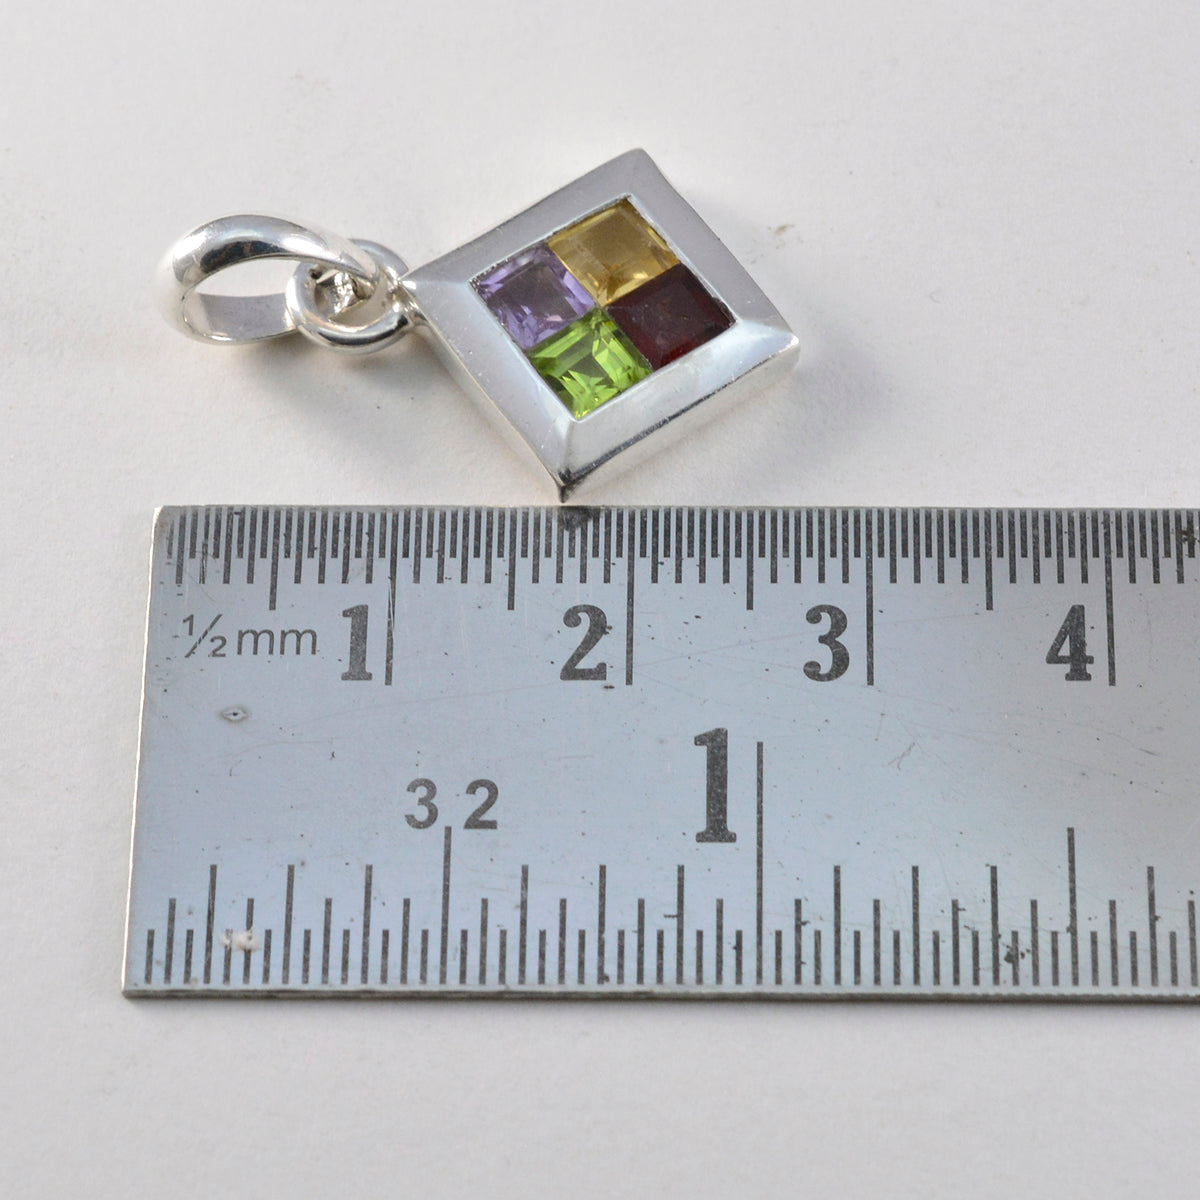 Riyo Tasty Gems Square Faceted Multi Color Multi Stone Solid Silver Pendant Gift For Easter Sunday